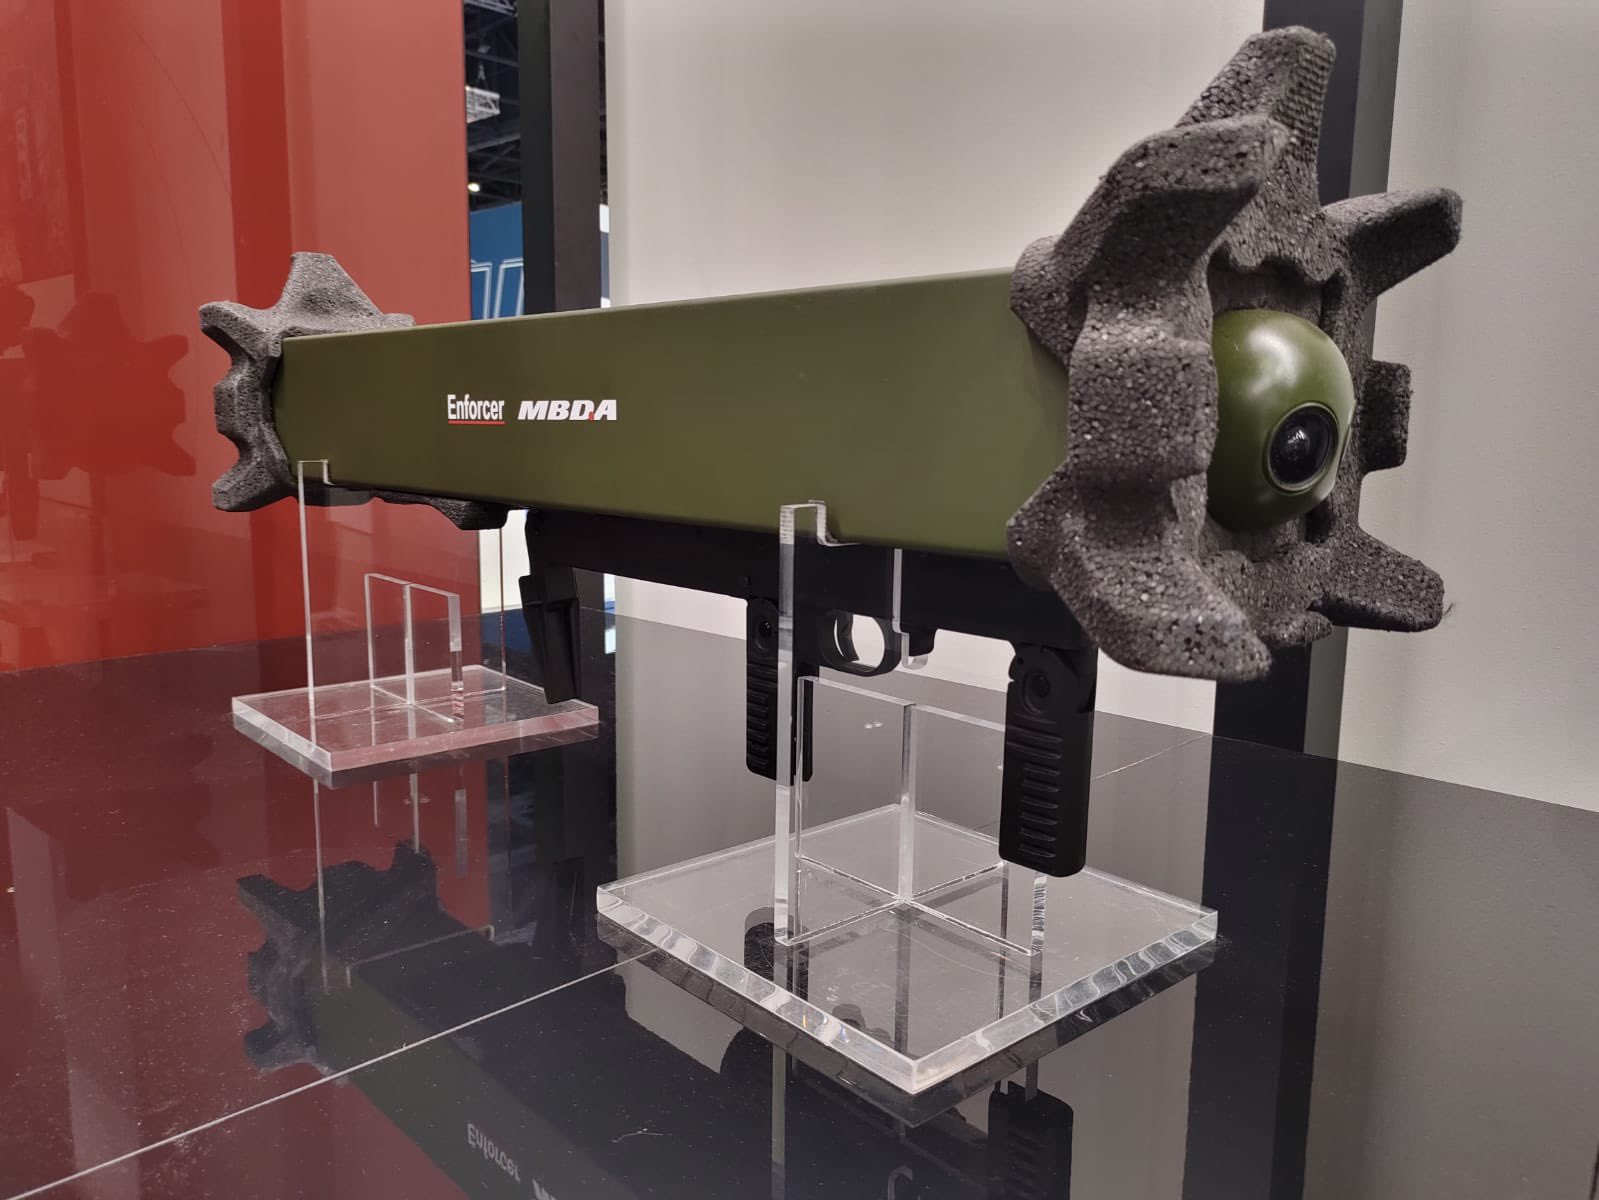 MBDA Showcases Enforcer Lightweight High Precision Missile System at DSEI